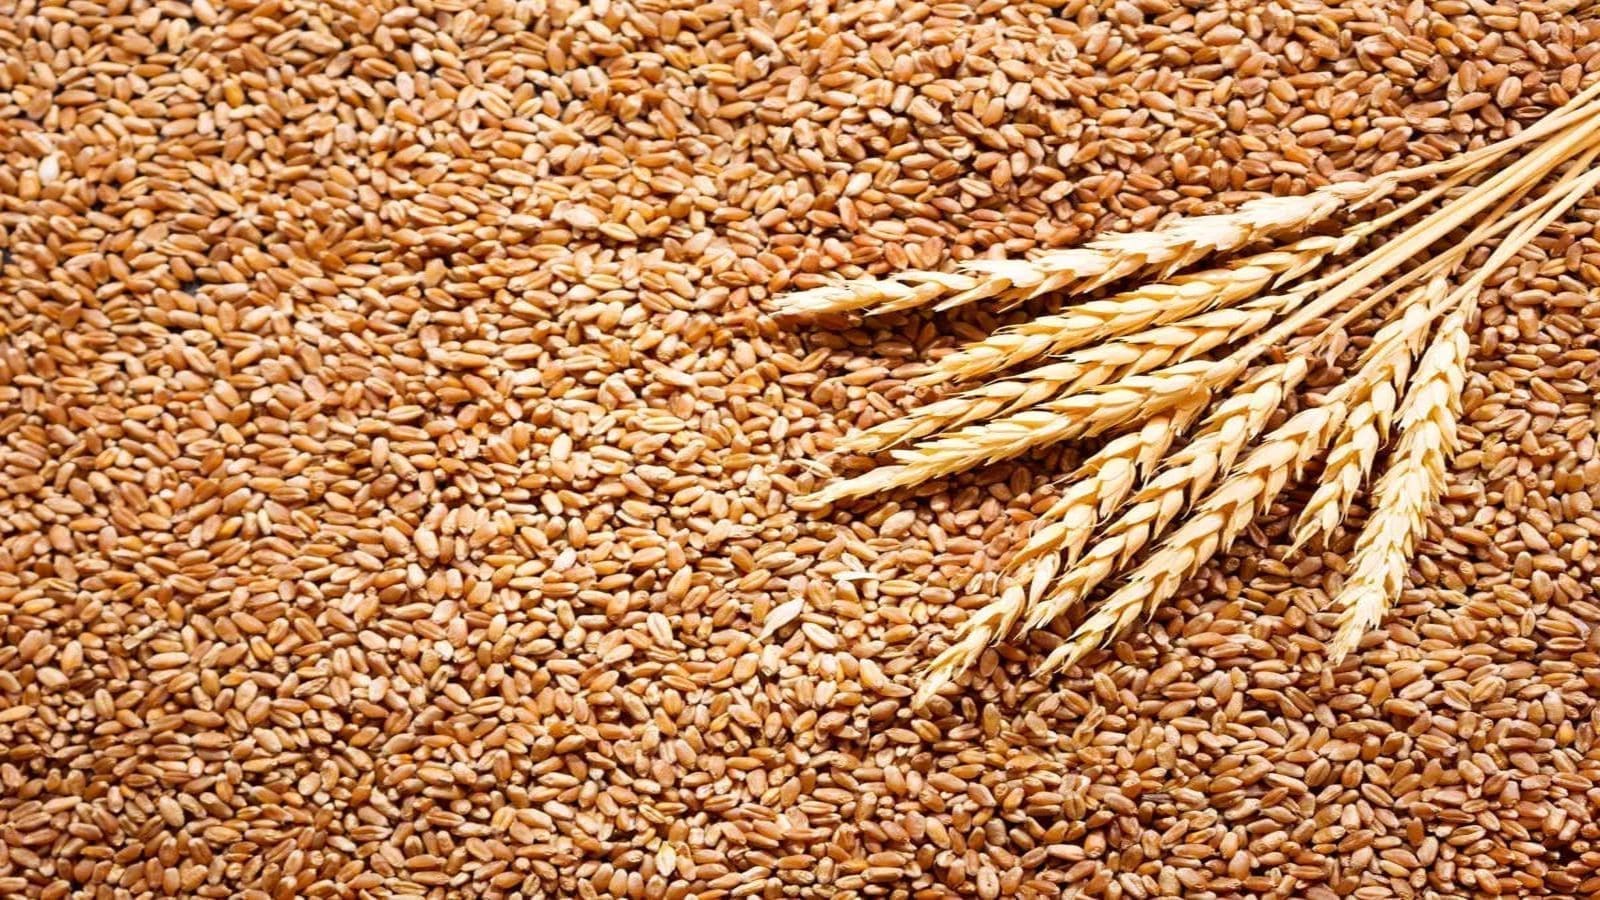 KEPHIS to conduct safety evaluations on Indian wheat